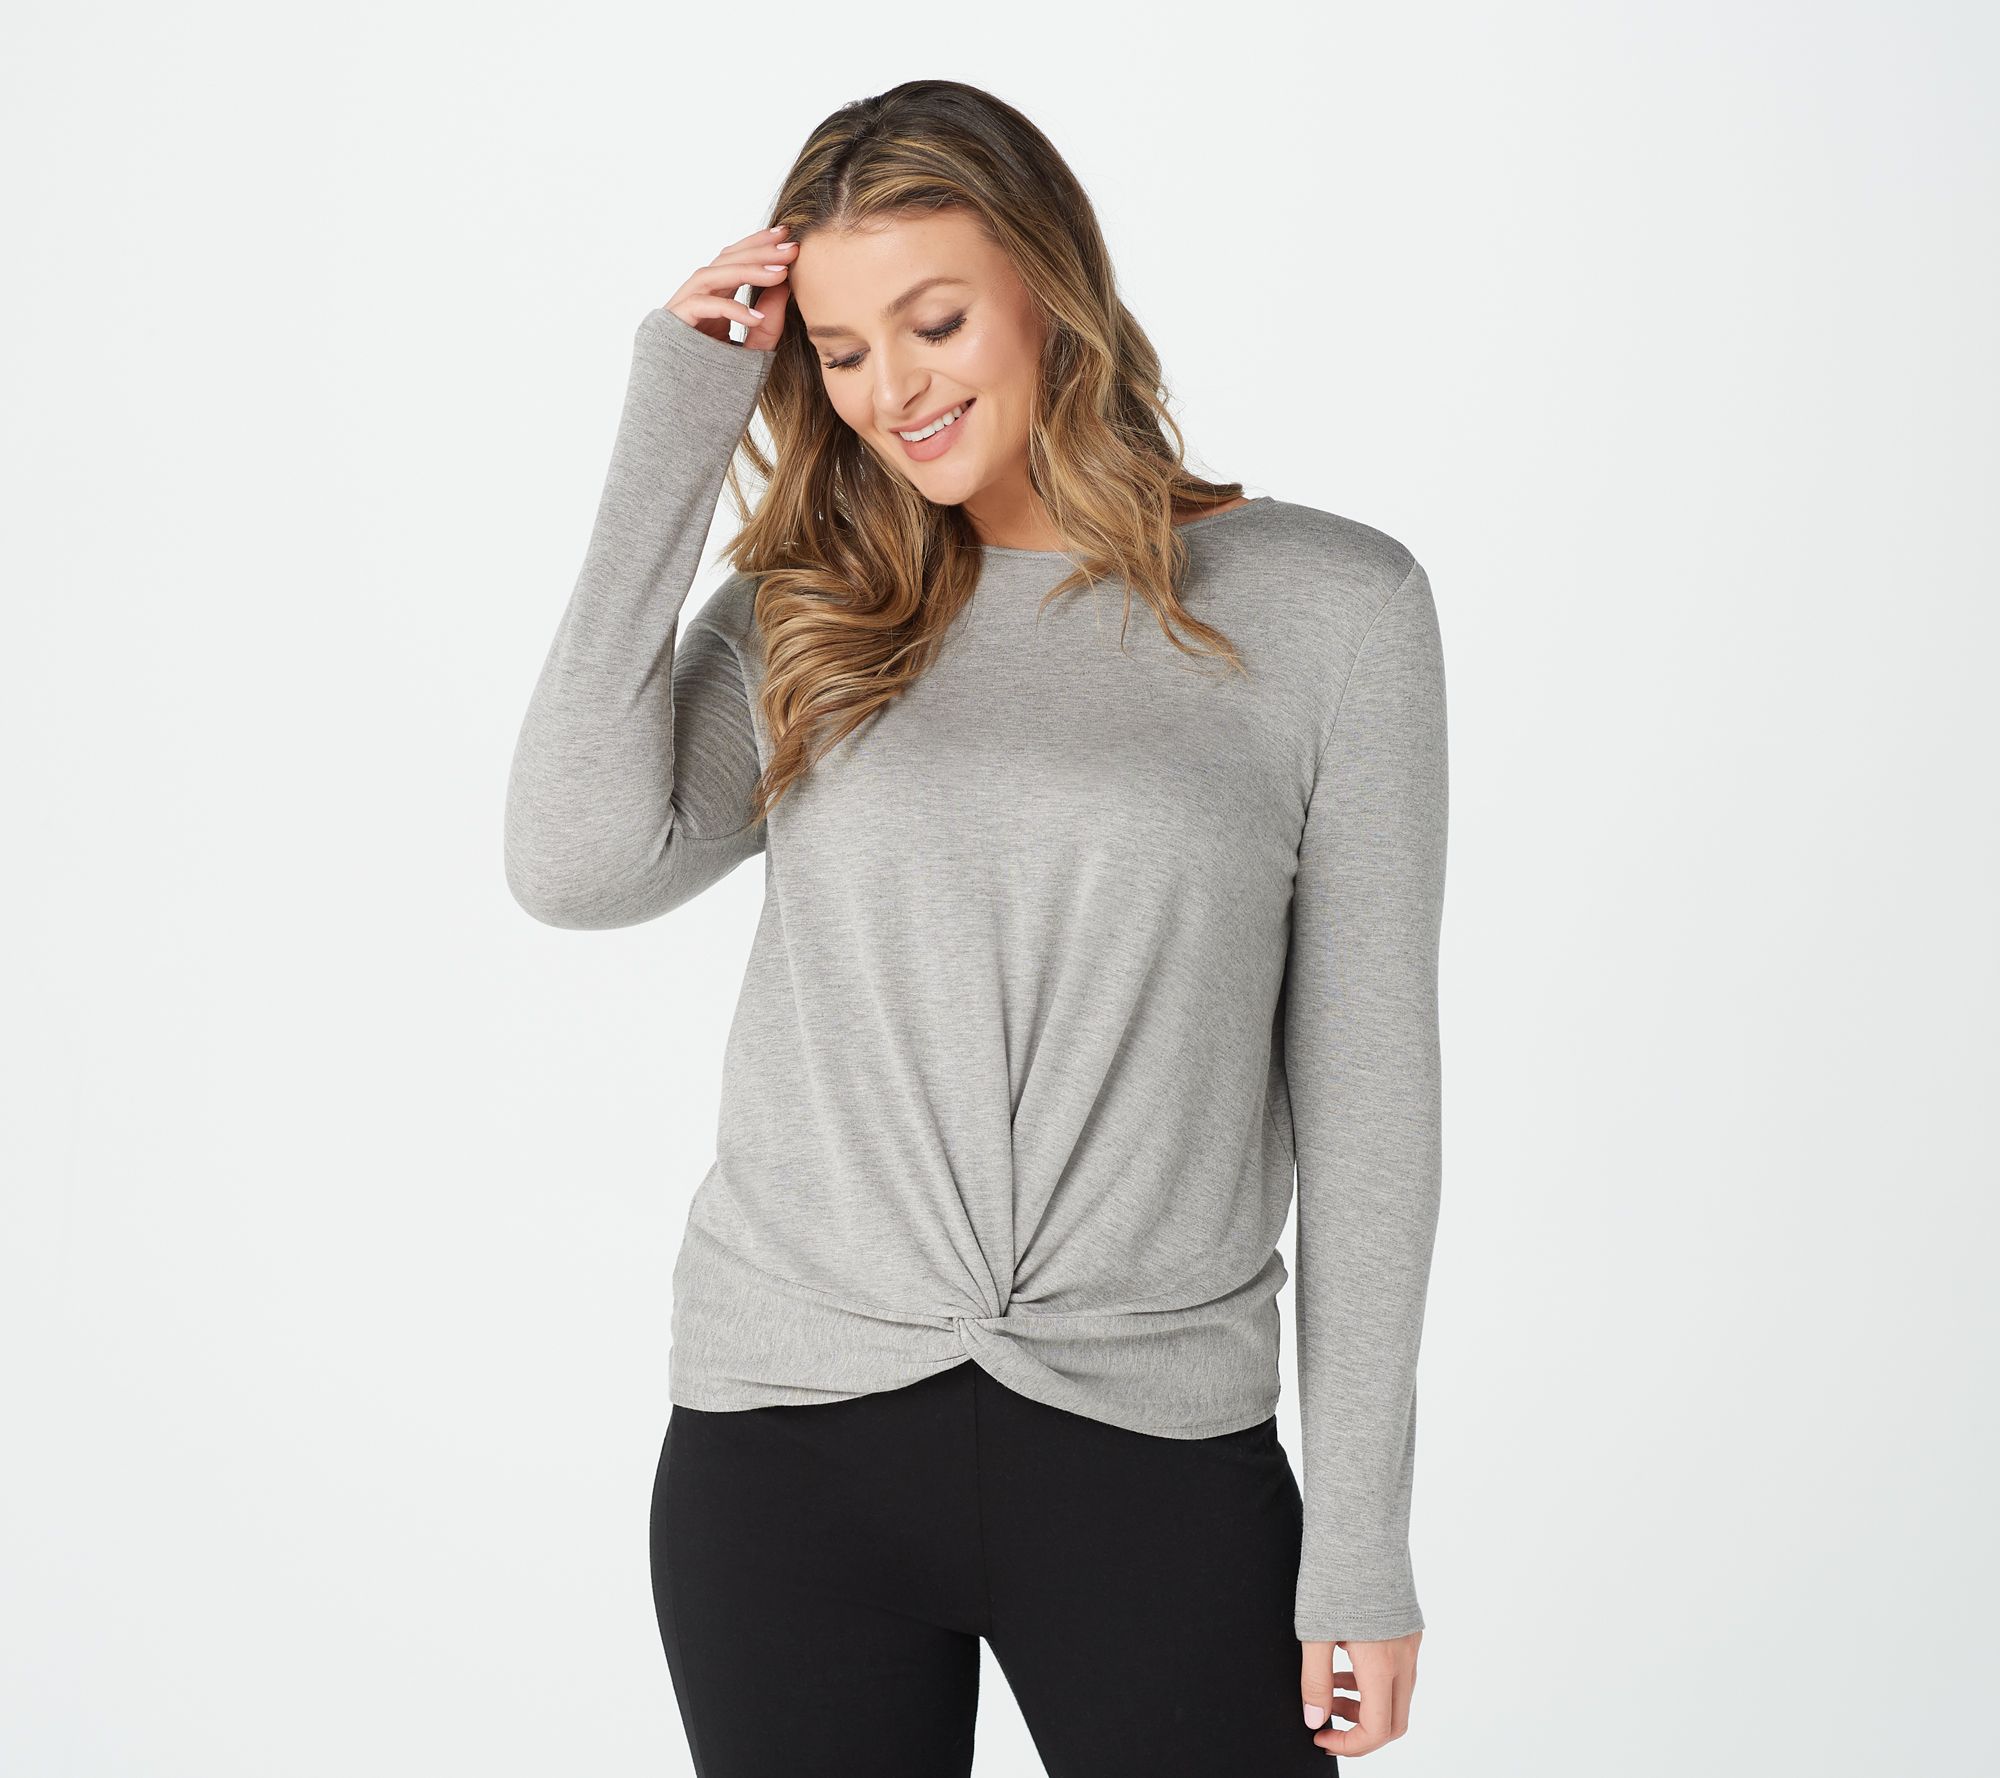 Tracy Anderson for G.I.L.I. Twist Front Knit Top - QVC.com